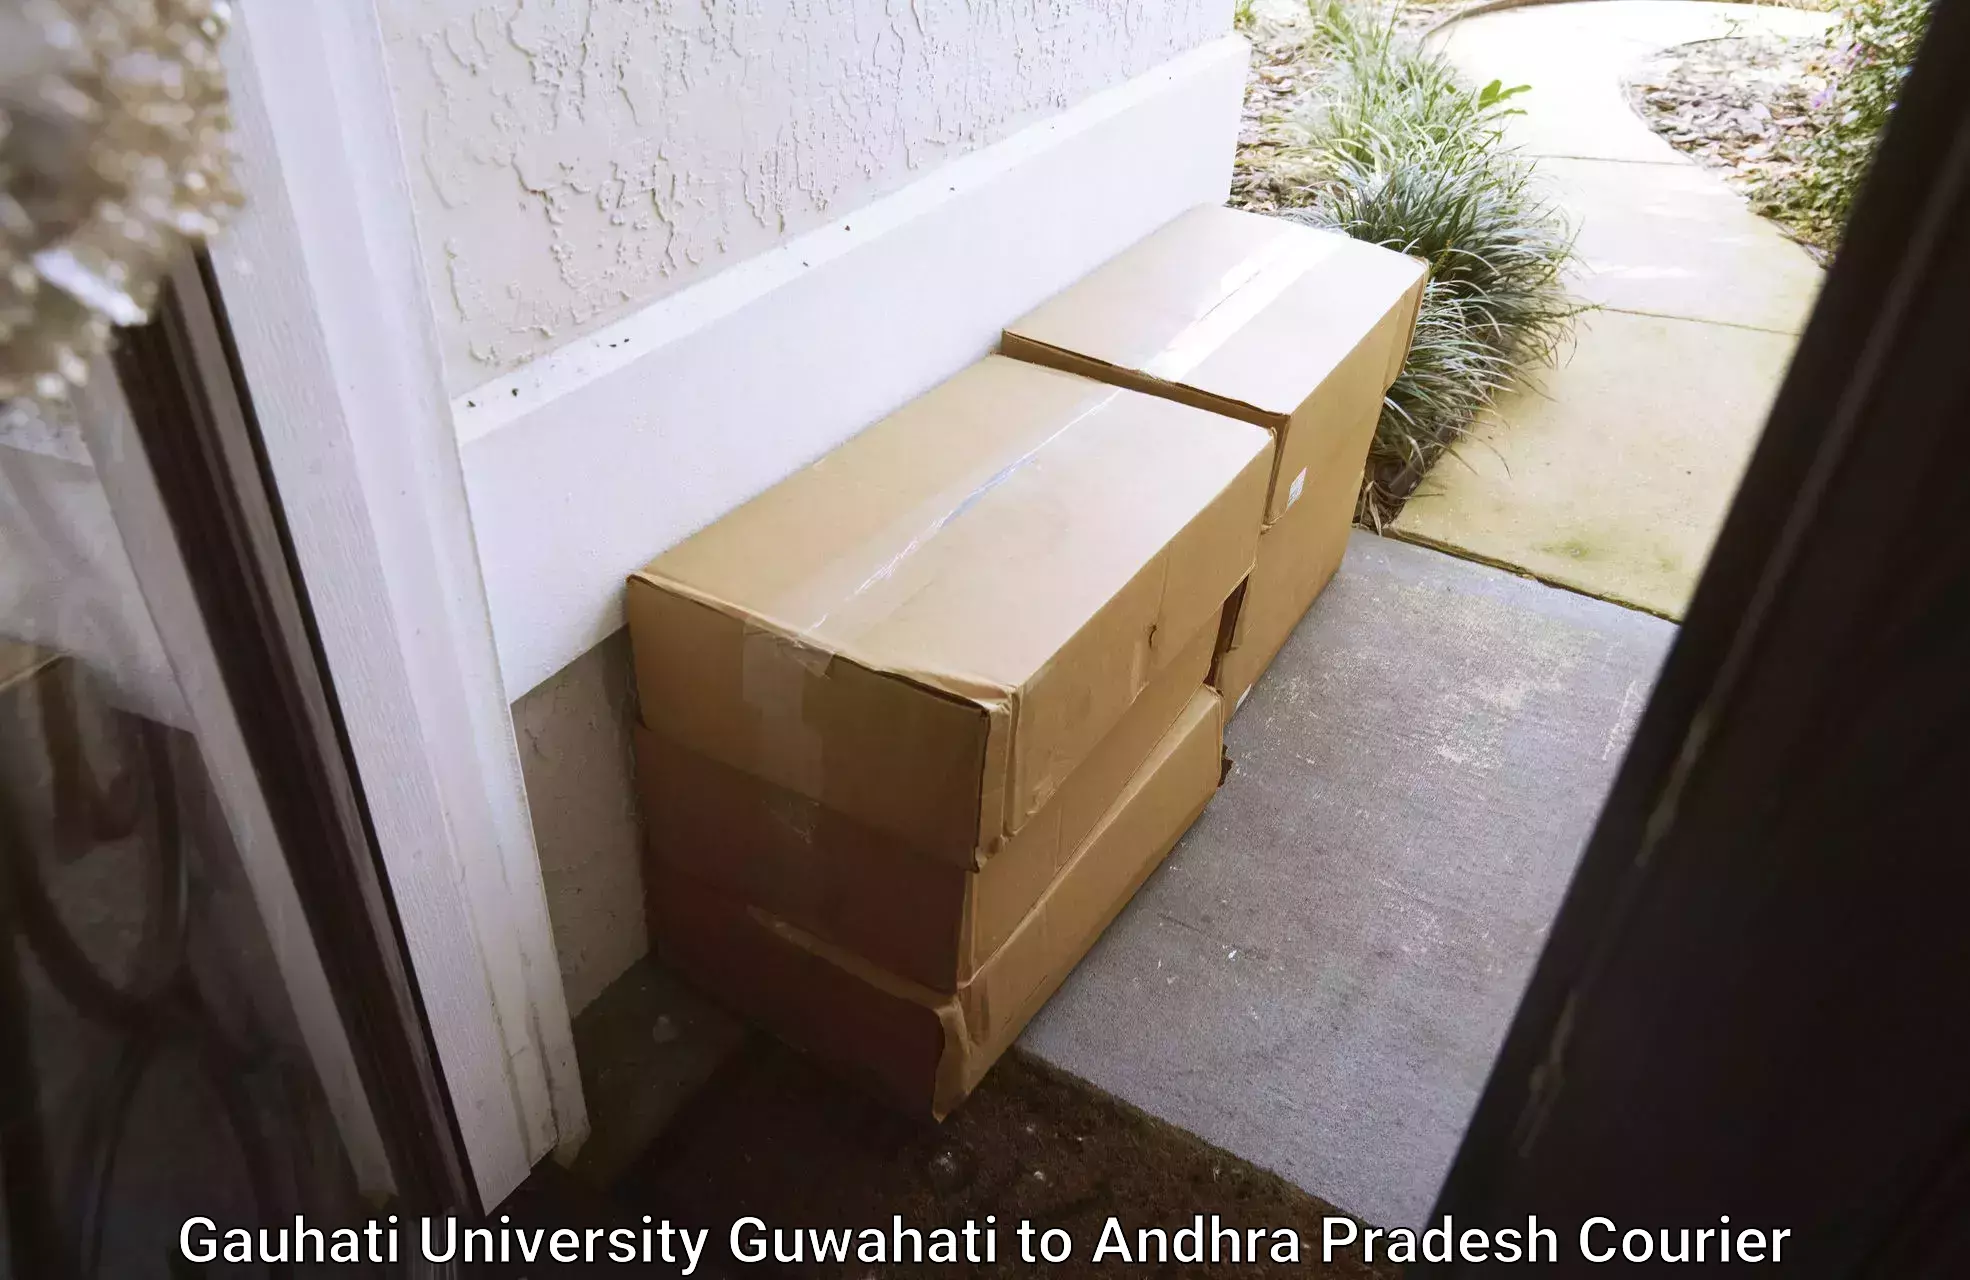 Parcel service for businesses in Gauhati University Guwahati to Pathapatnam